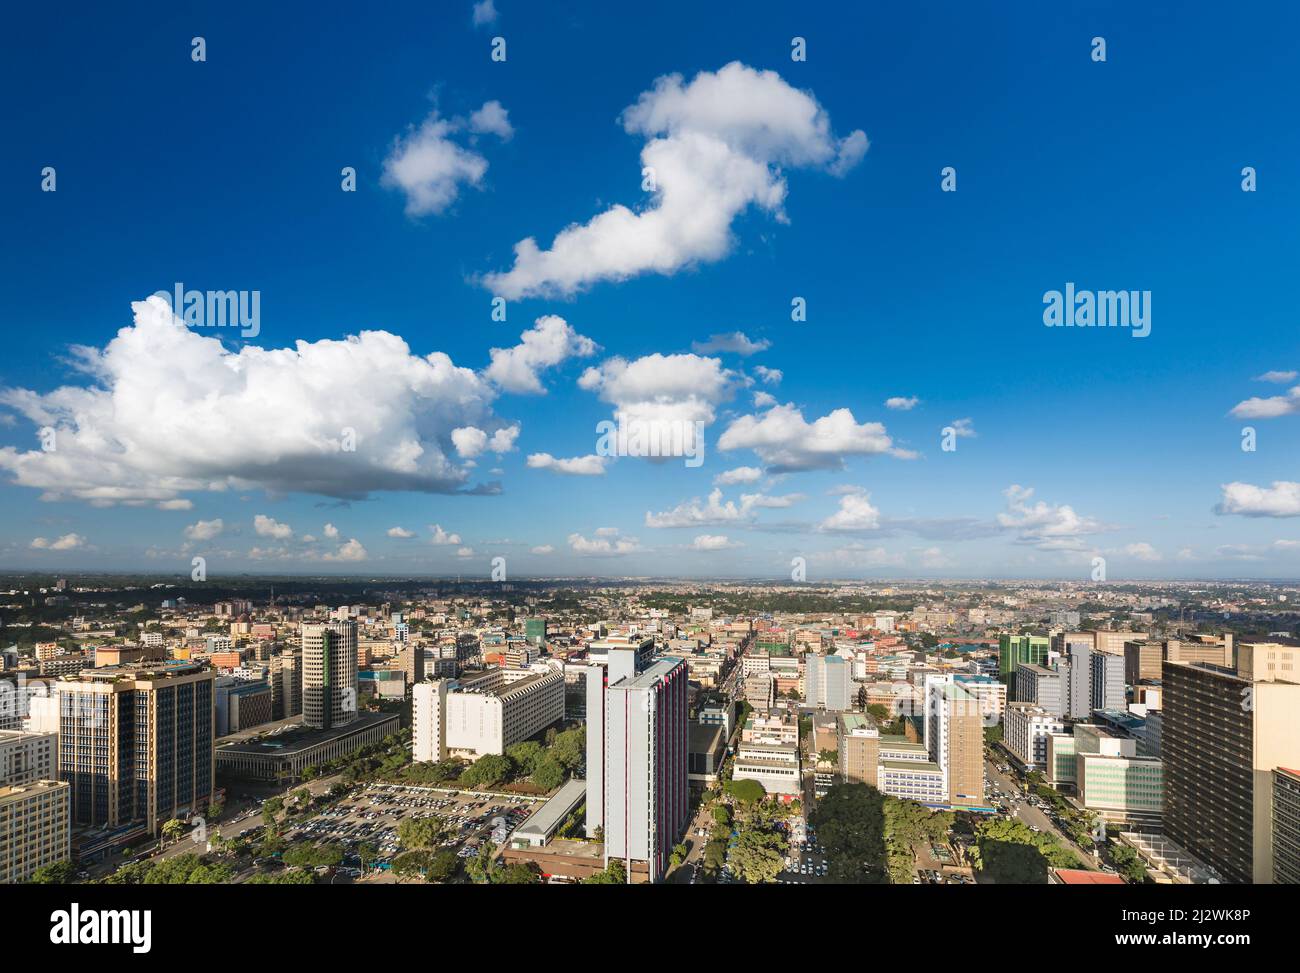 View over the central business district of Nairobi, Kenya to the east with deep blue sky. Stock Photo